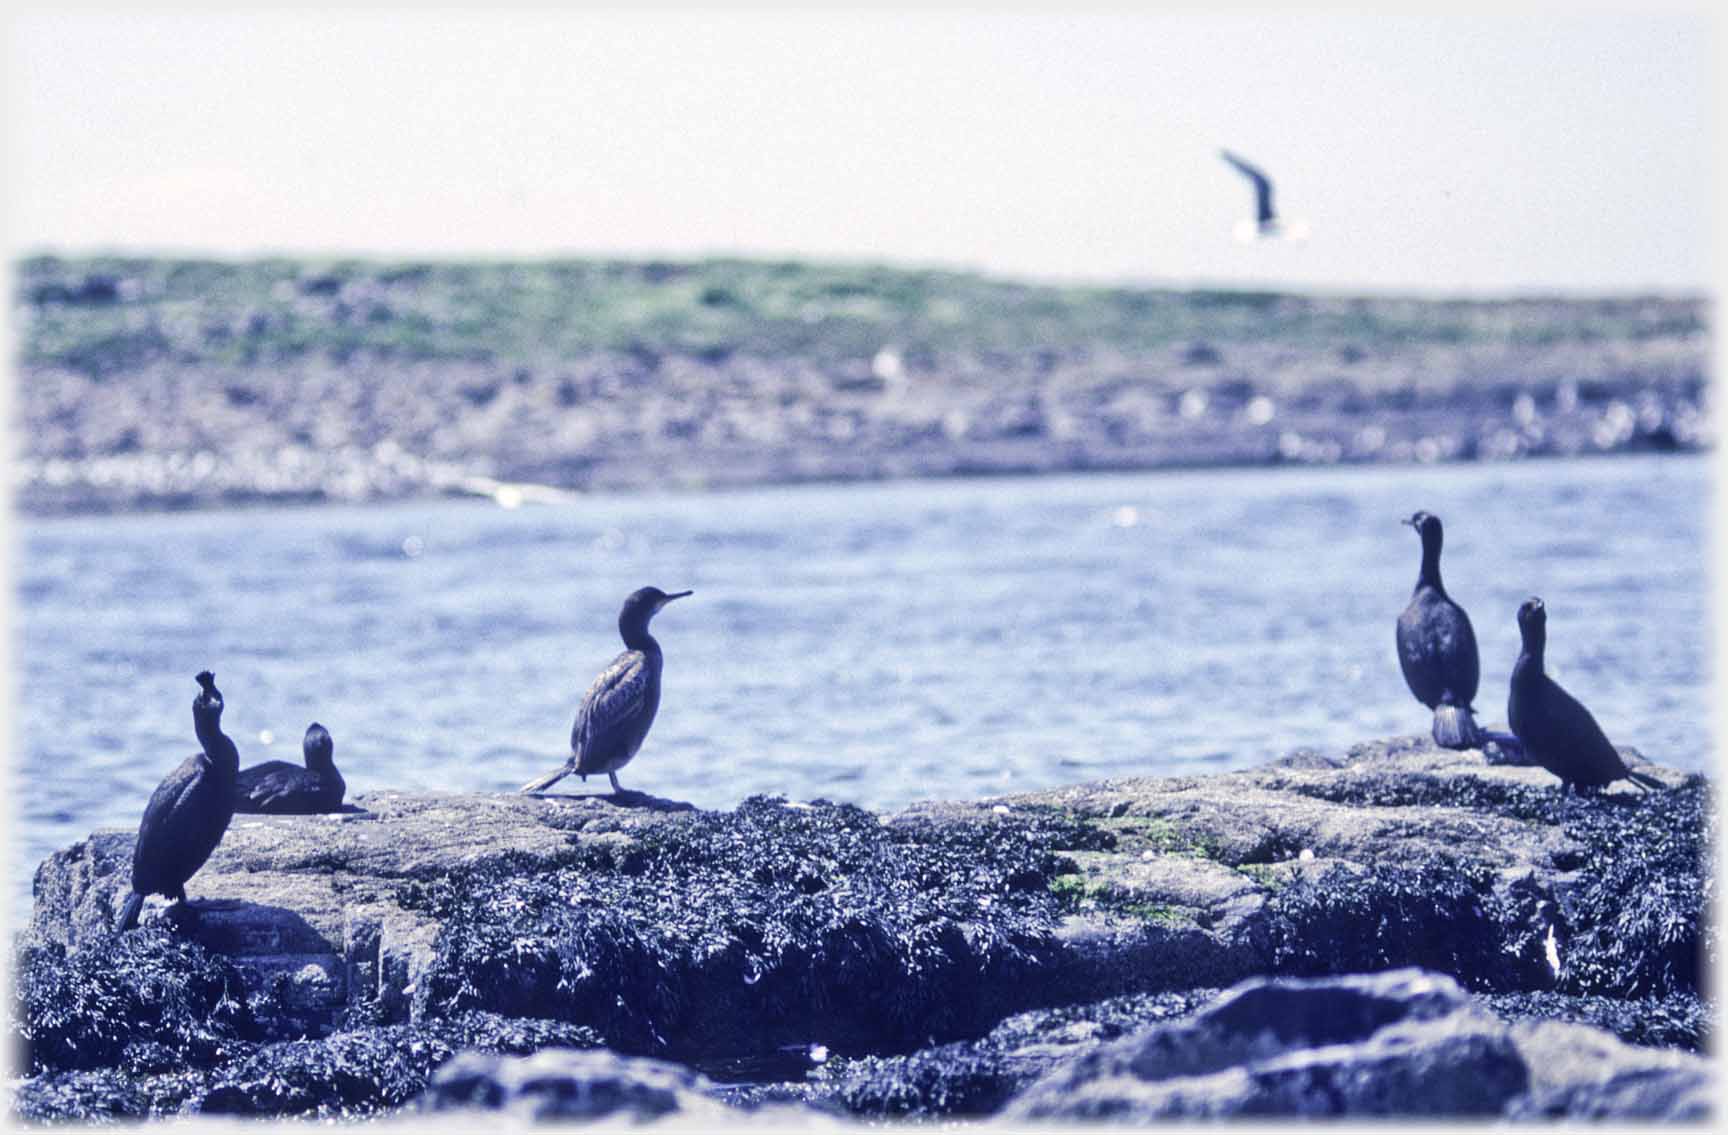 Group of cormorants or shags standing on rock.